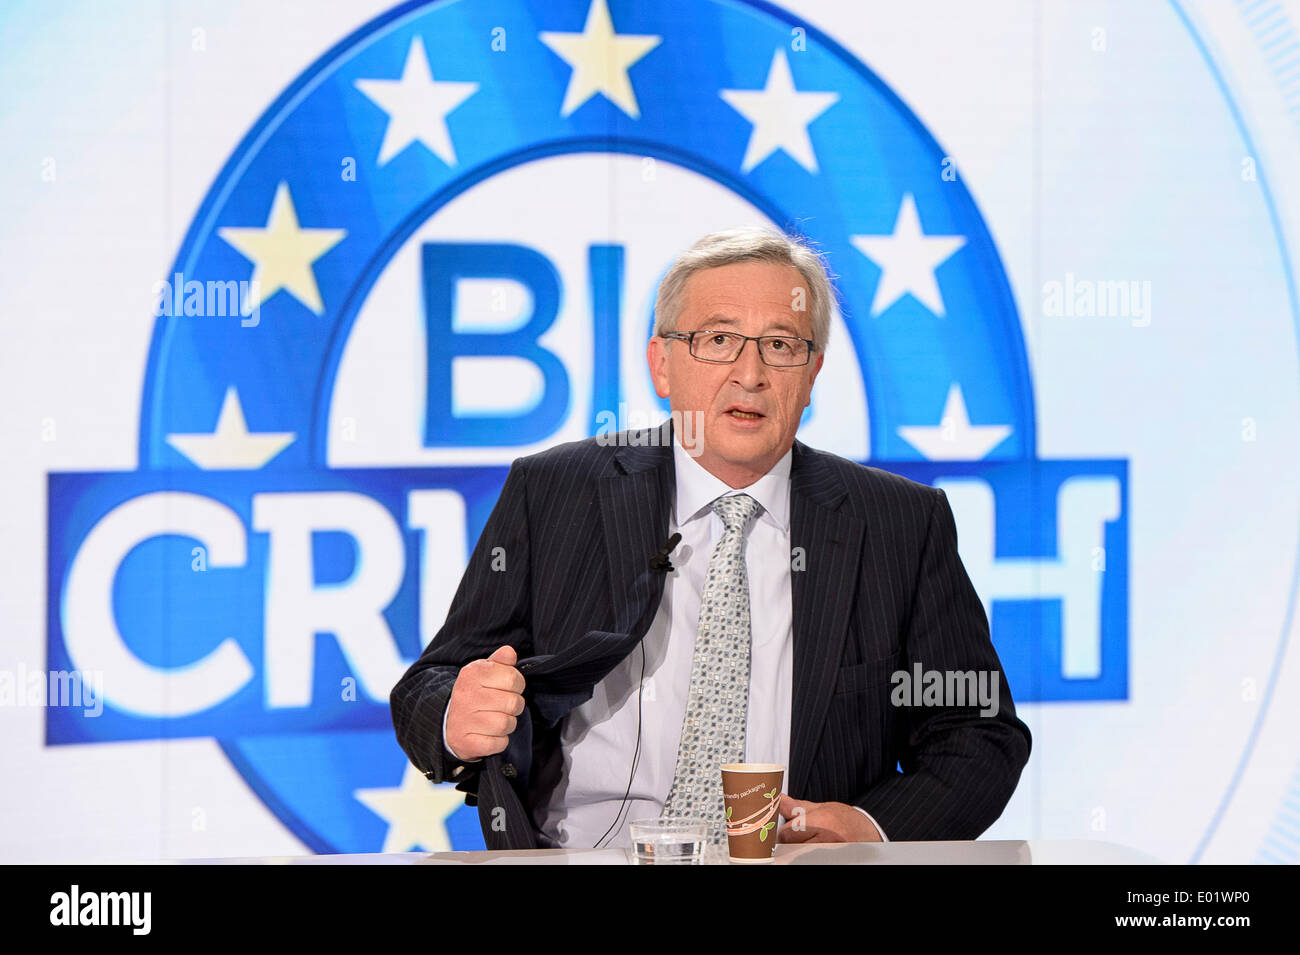 Brussels, Belgium. 29th April 2014. Jean-Claude Juncker, top candidate for European People's Party (EPP) during Euranet's 'Big Crunch' Presidential debate at the EU parliament in BrusselsThe four top candidates for the presidency of the European Commission - Jean-Claude Juncker, Ska Keller, Martin Schulz and Guy Verhofstadt - attend EU-wide debate organized by EuranetPlus and focused on the major election topics. Credit:  dpa picture alliance/Alamy Live News Stock Photo